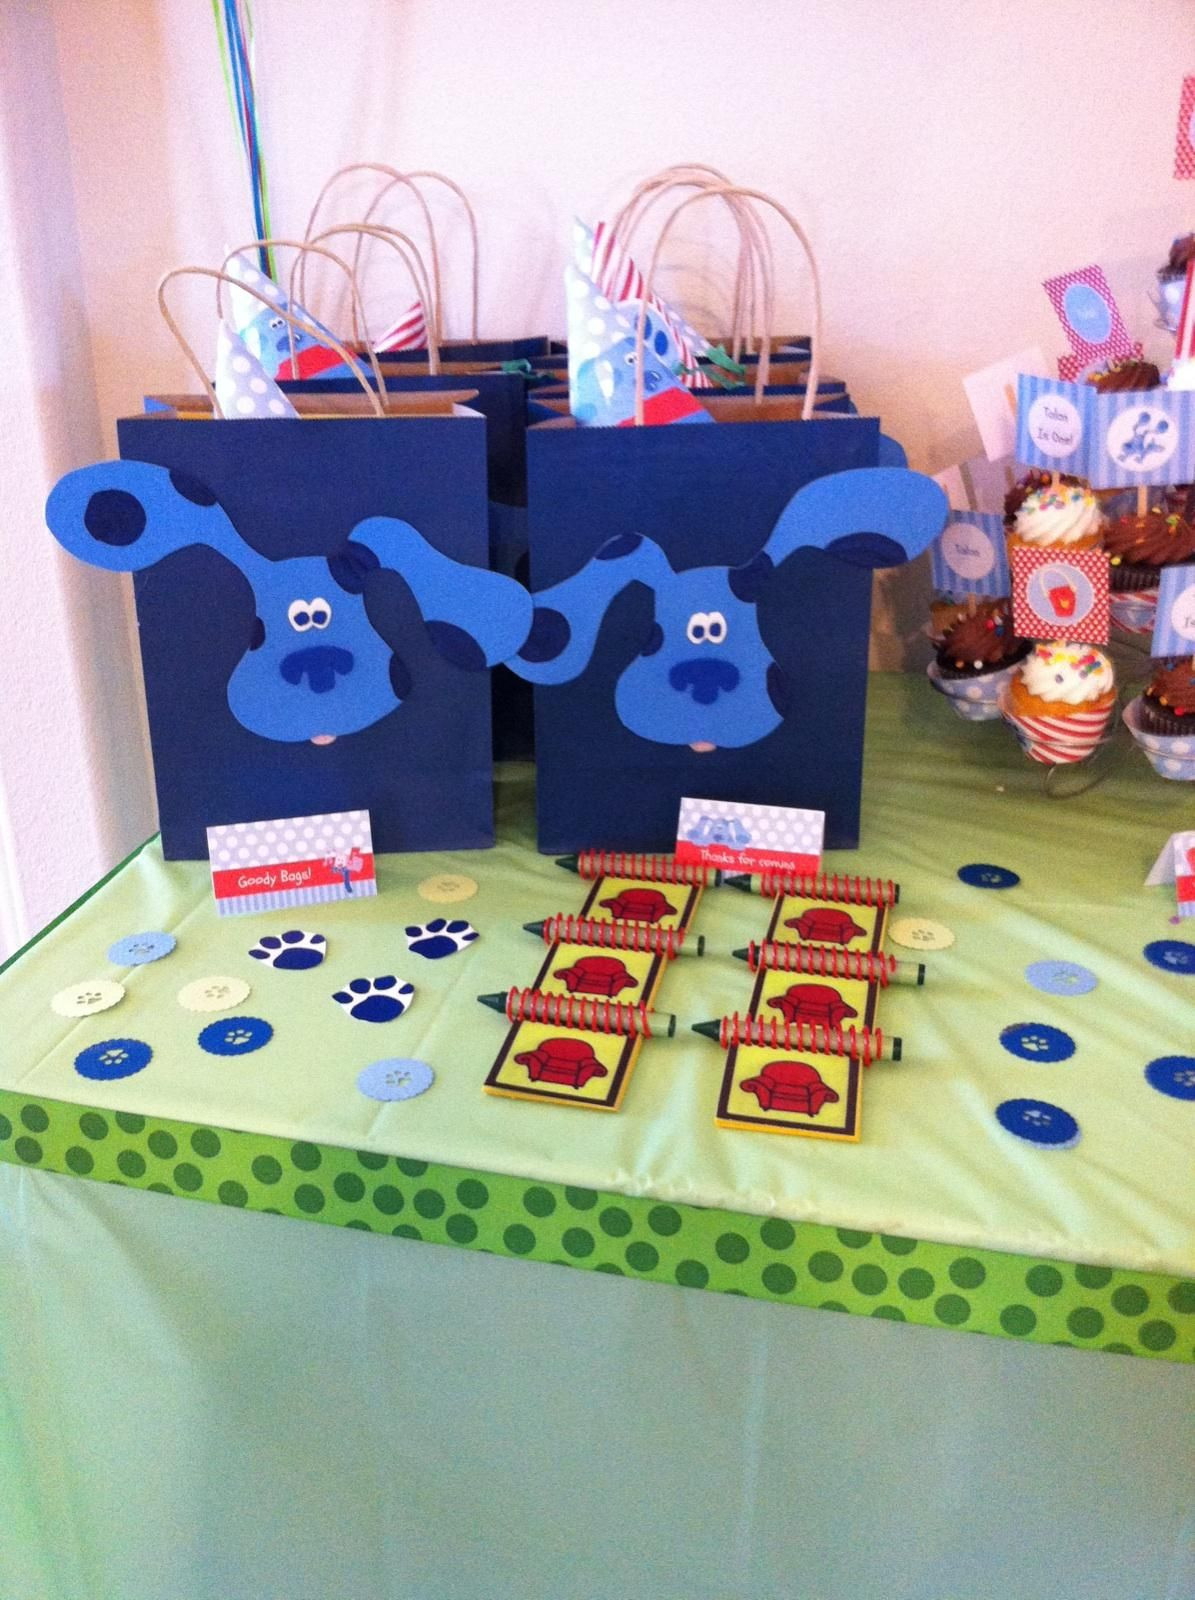 Blues Clues Birthday Party Supplies
 Blues clues party pic for inspiration